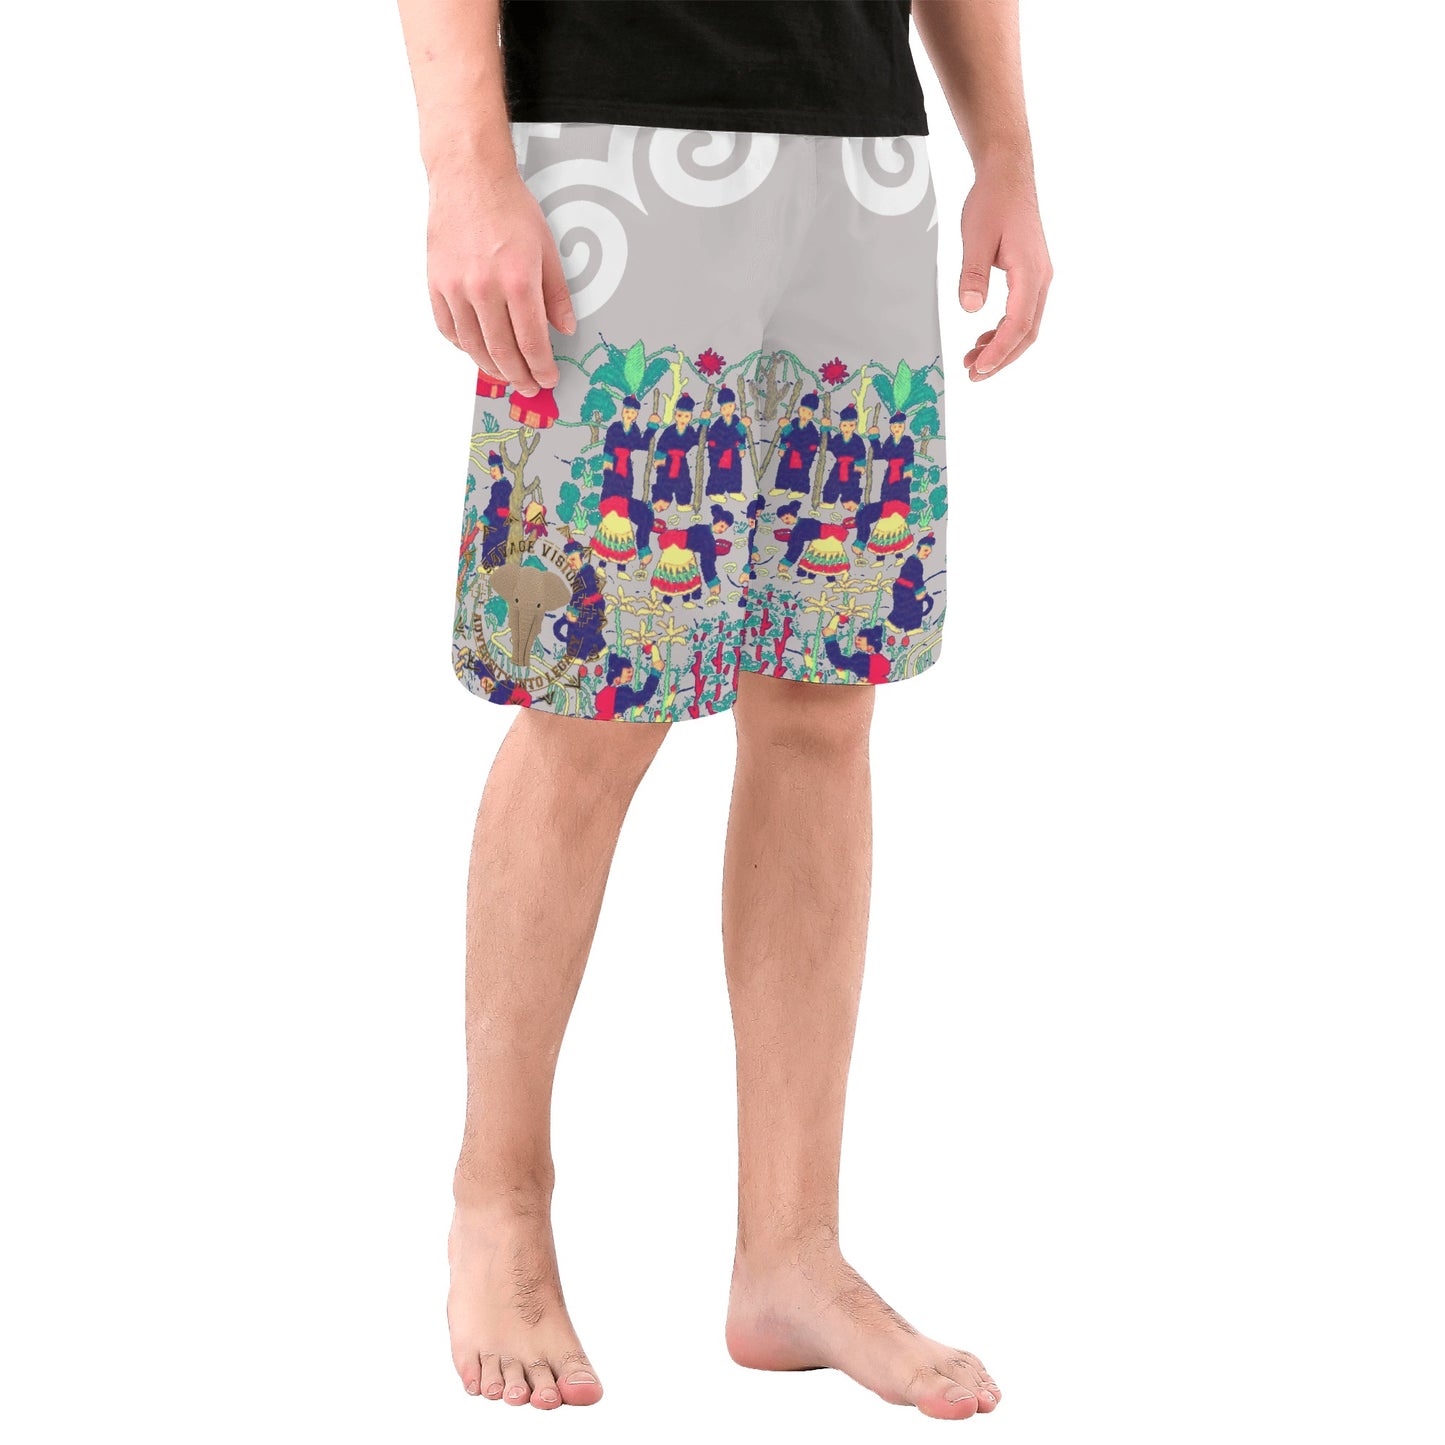 Embrace Summer Vibes with Savage Vision Apparels Contemporary Hmong-Inspired Shorts